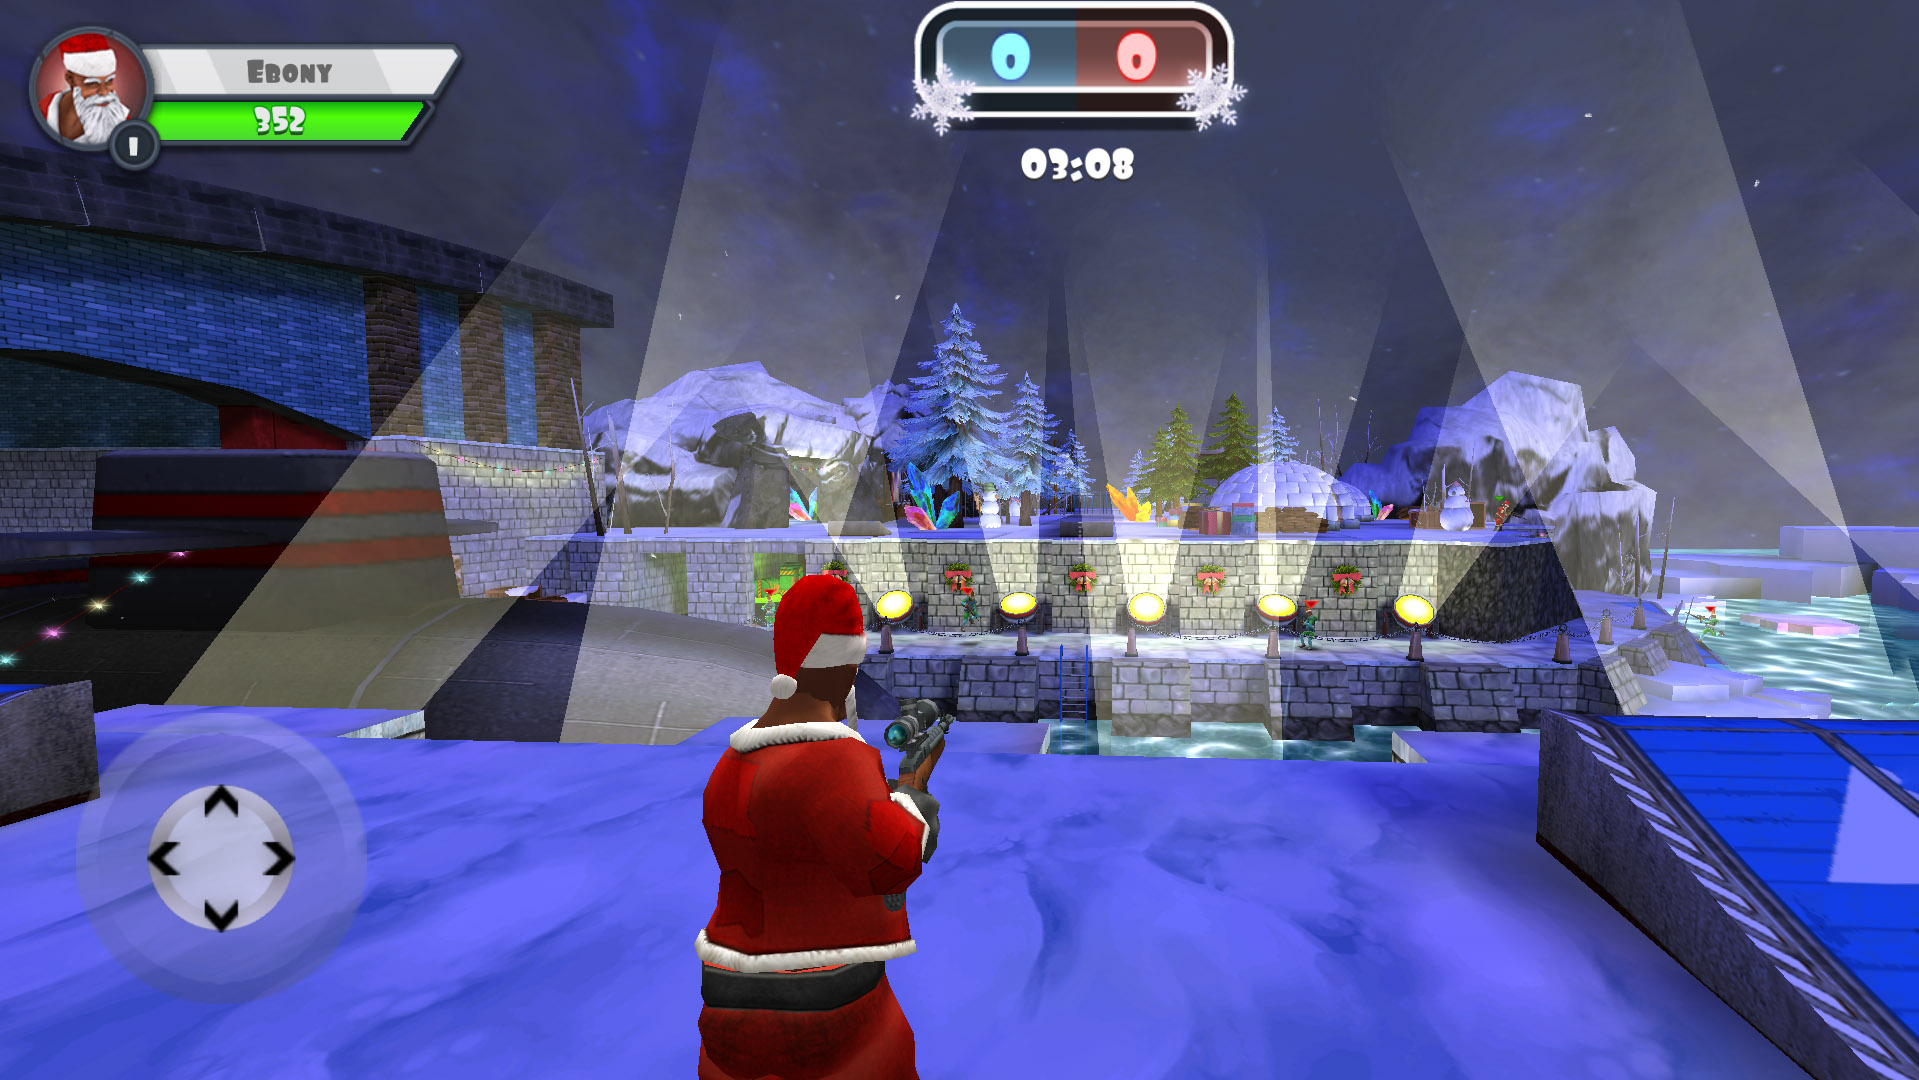 WINTER CLASH 3D - Play Online for Free!